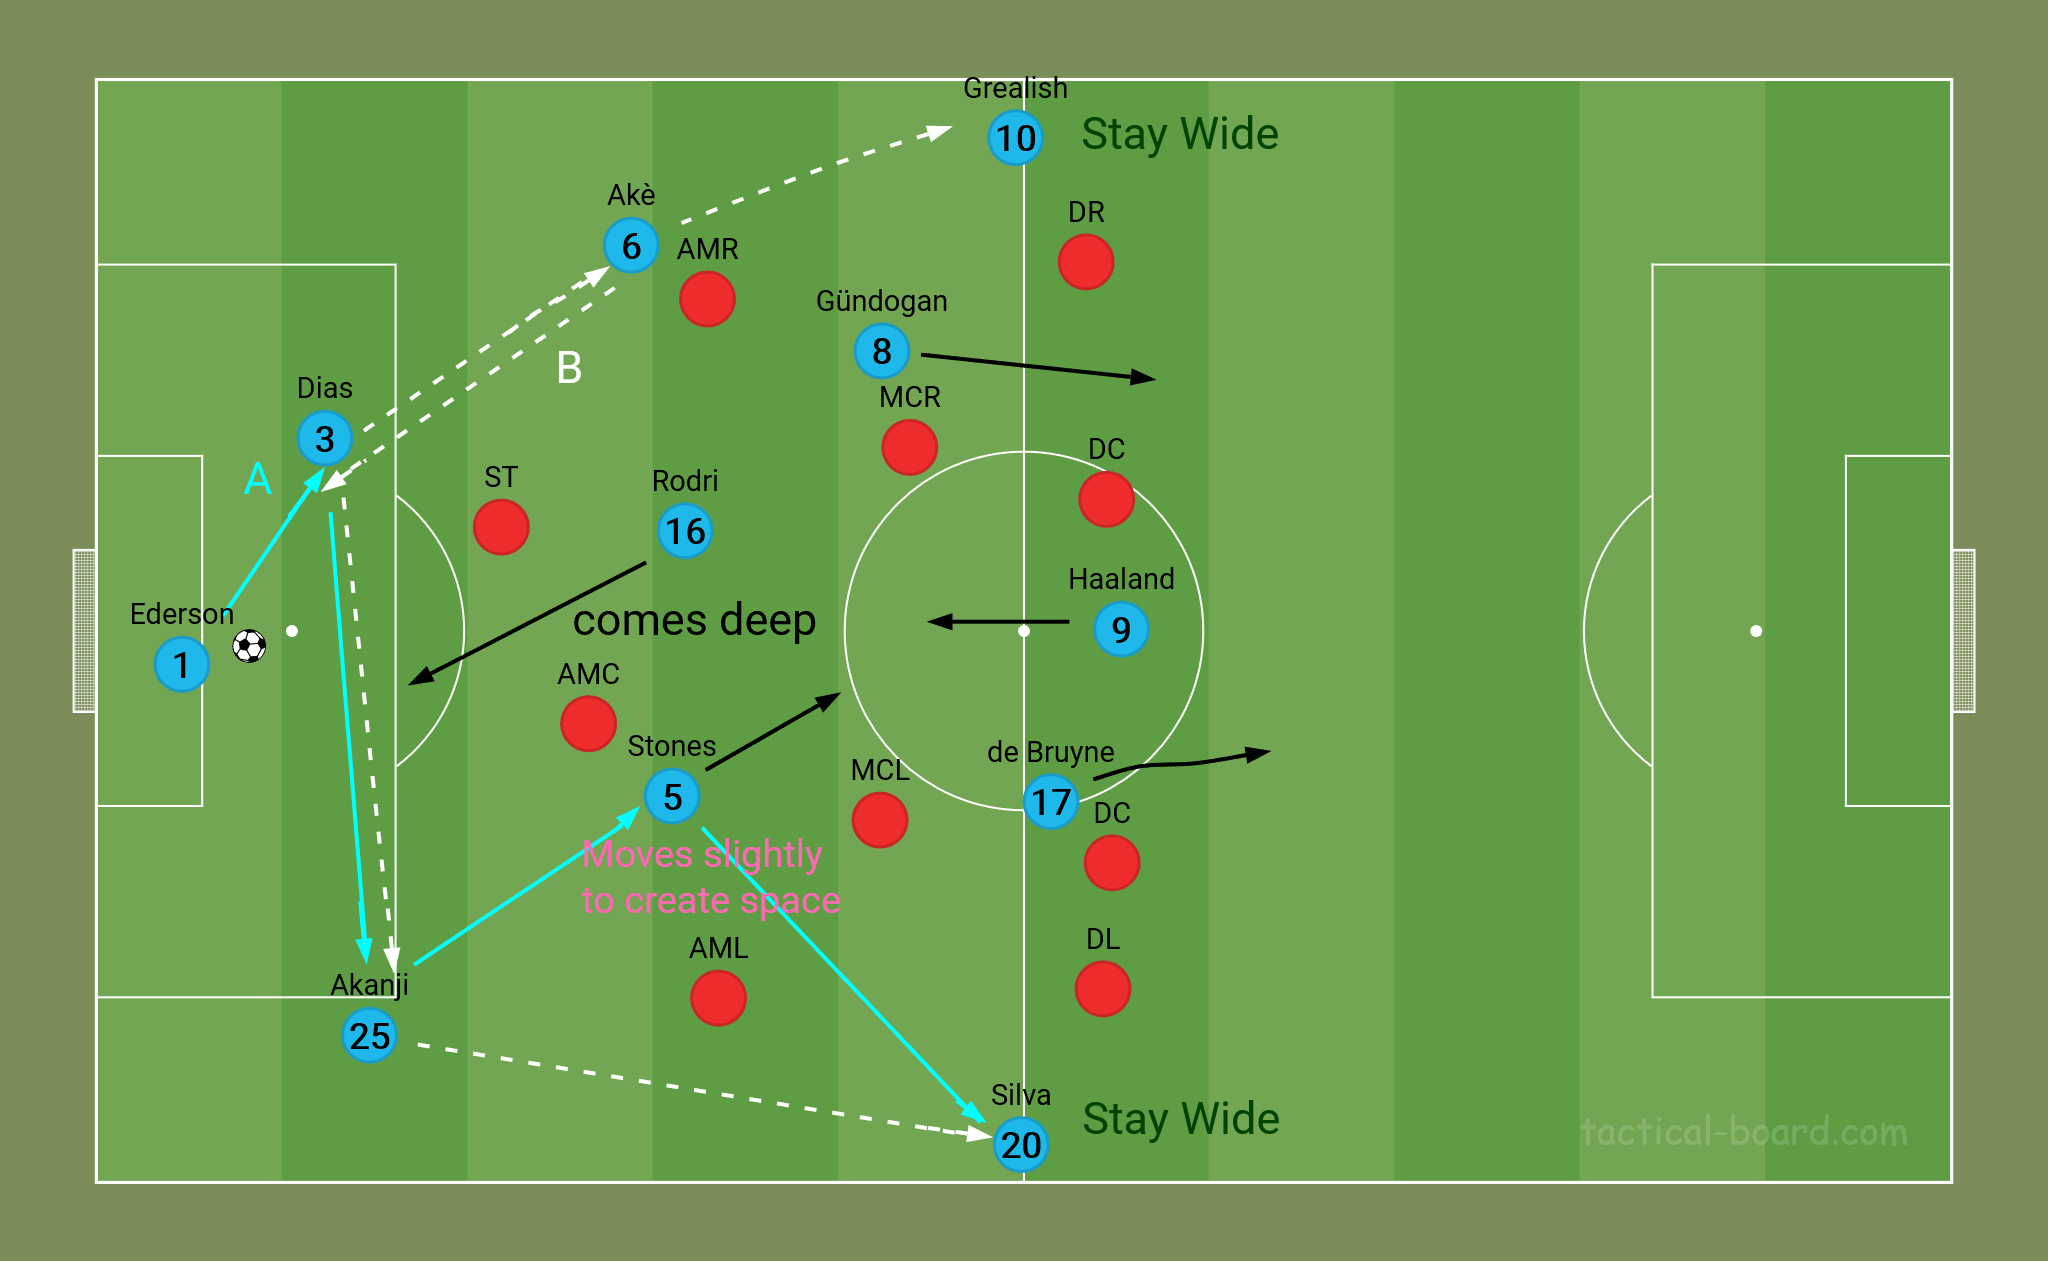 Pep Guardiola Man City build-up play from defence